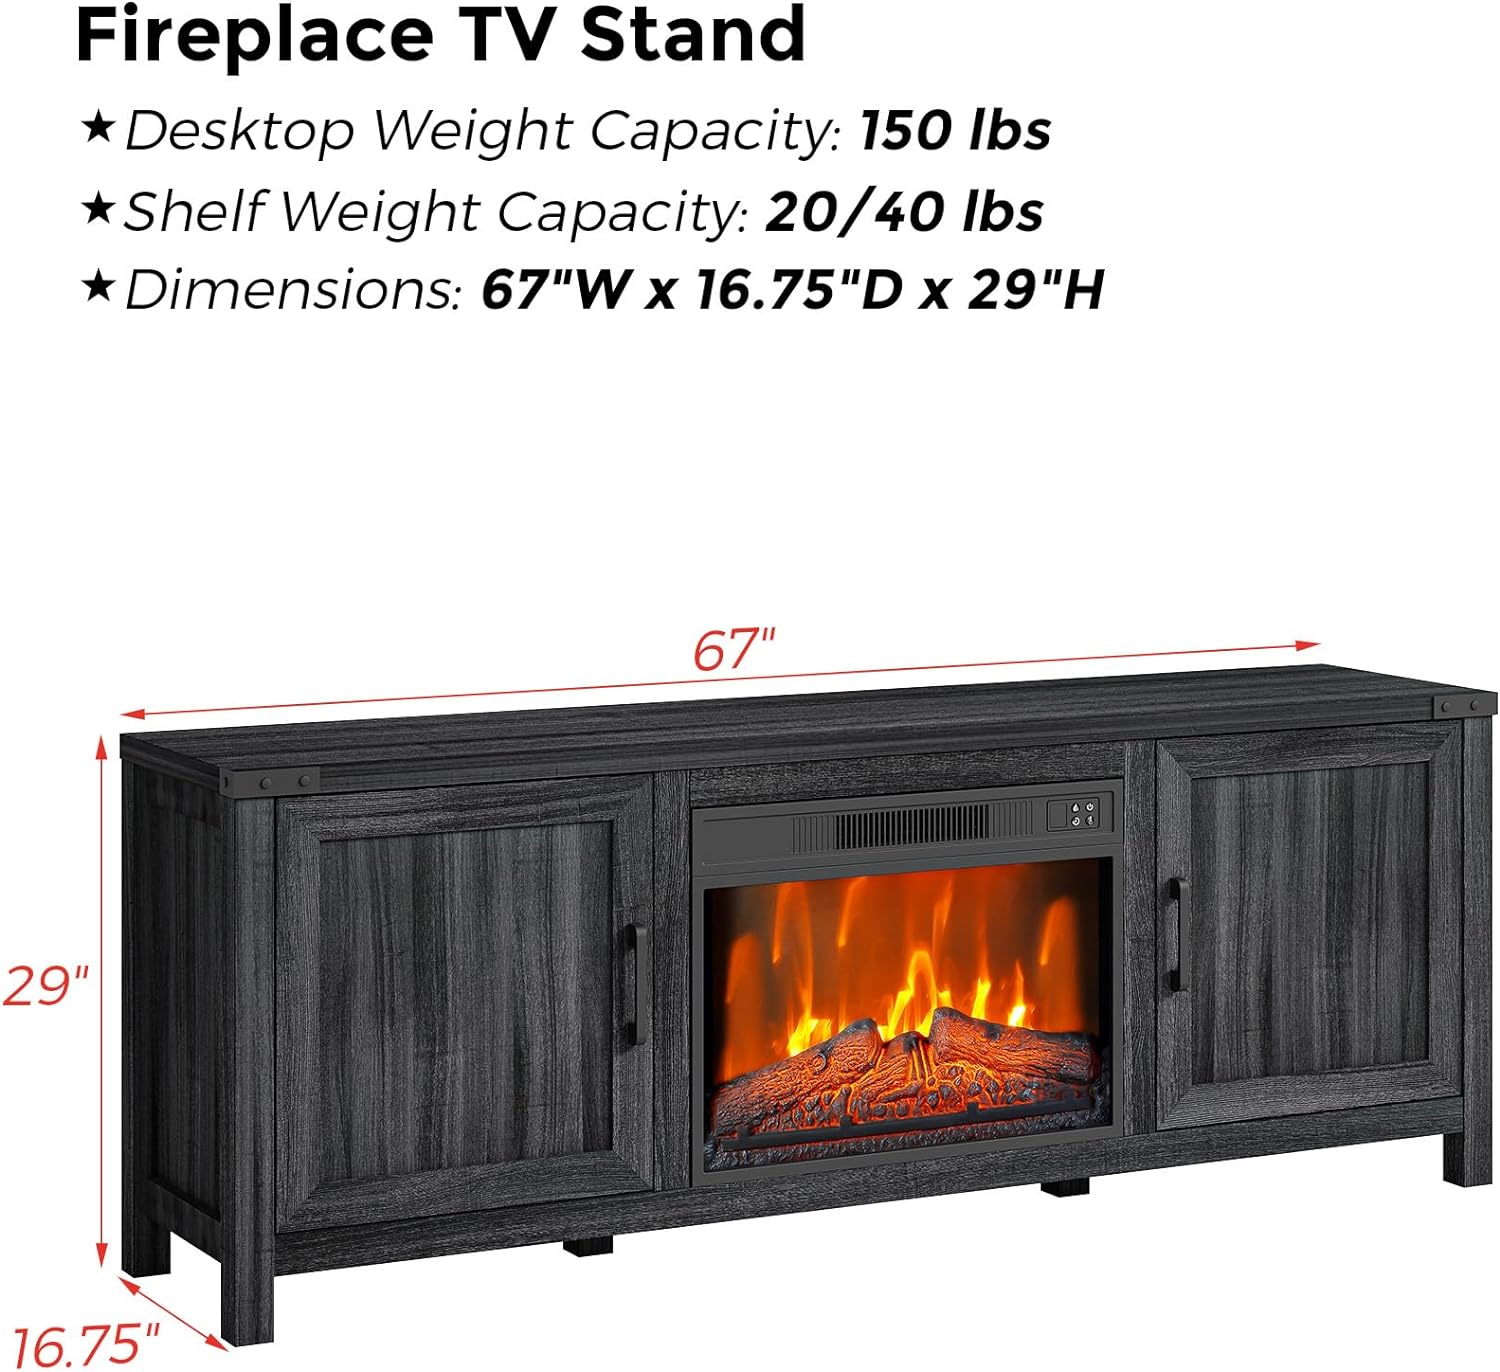 Electric Fireplace TV Stand for TVs up to 65 Inch, Entertainment Center with 23 Inch Electric Fireplace Remote Control, TV Console Cabinet with Open Storage Shelves for Living Room, Black